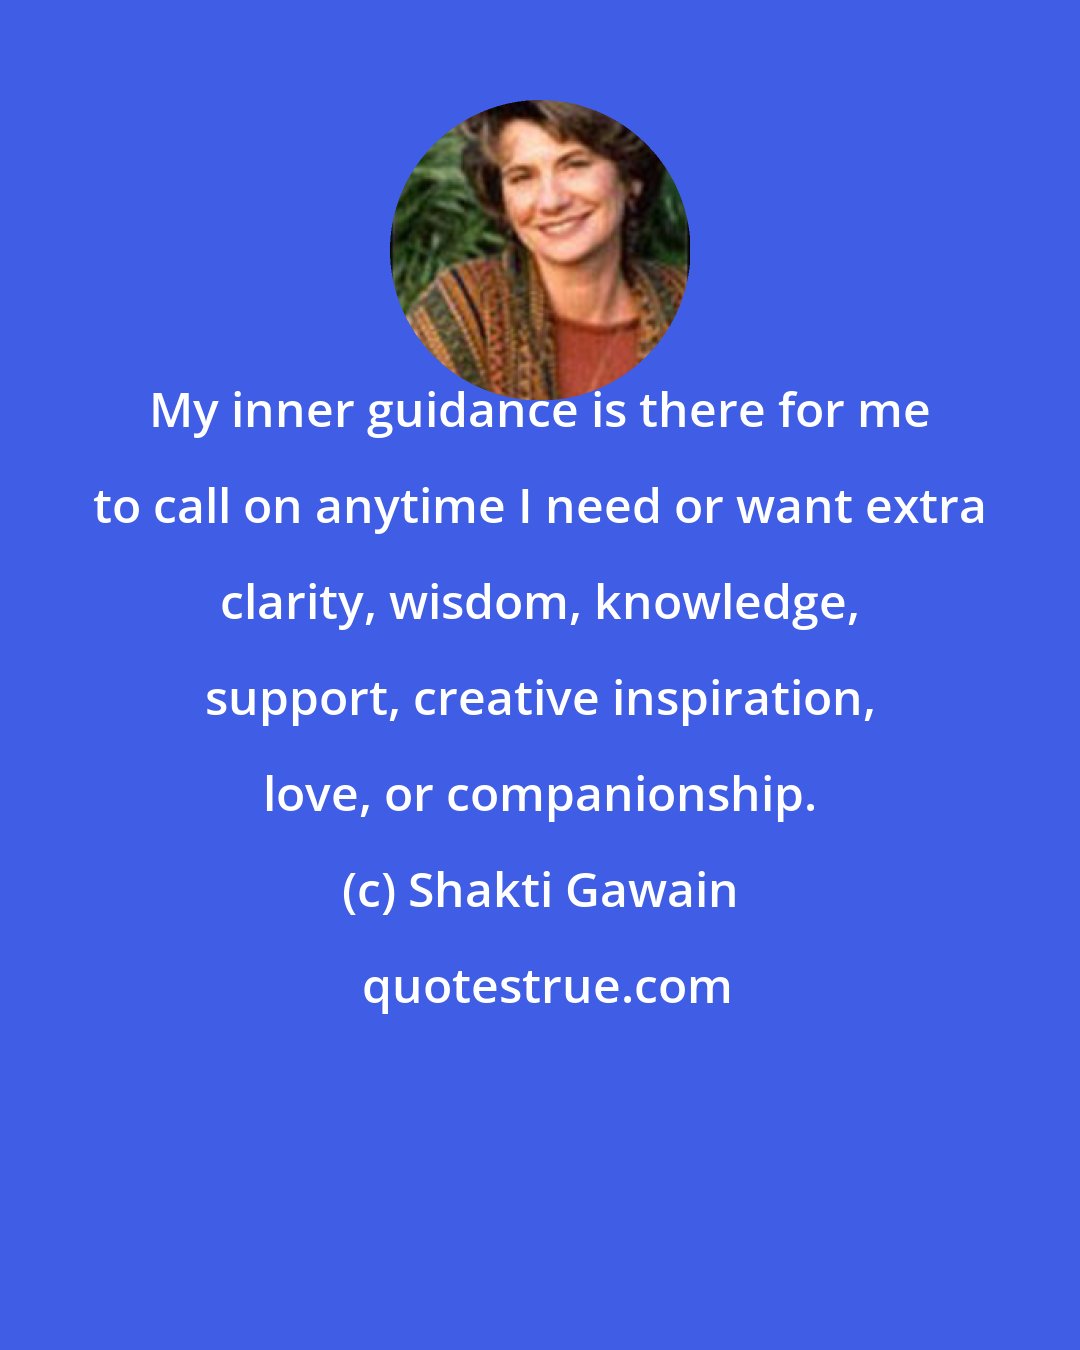 Shakti Gawain: My inner guidance is there for me to call on anytime I need or want extra clarity, wisdom, knowledge, support, creative inspiration, love, or companionship.